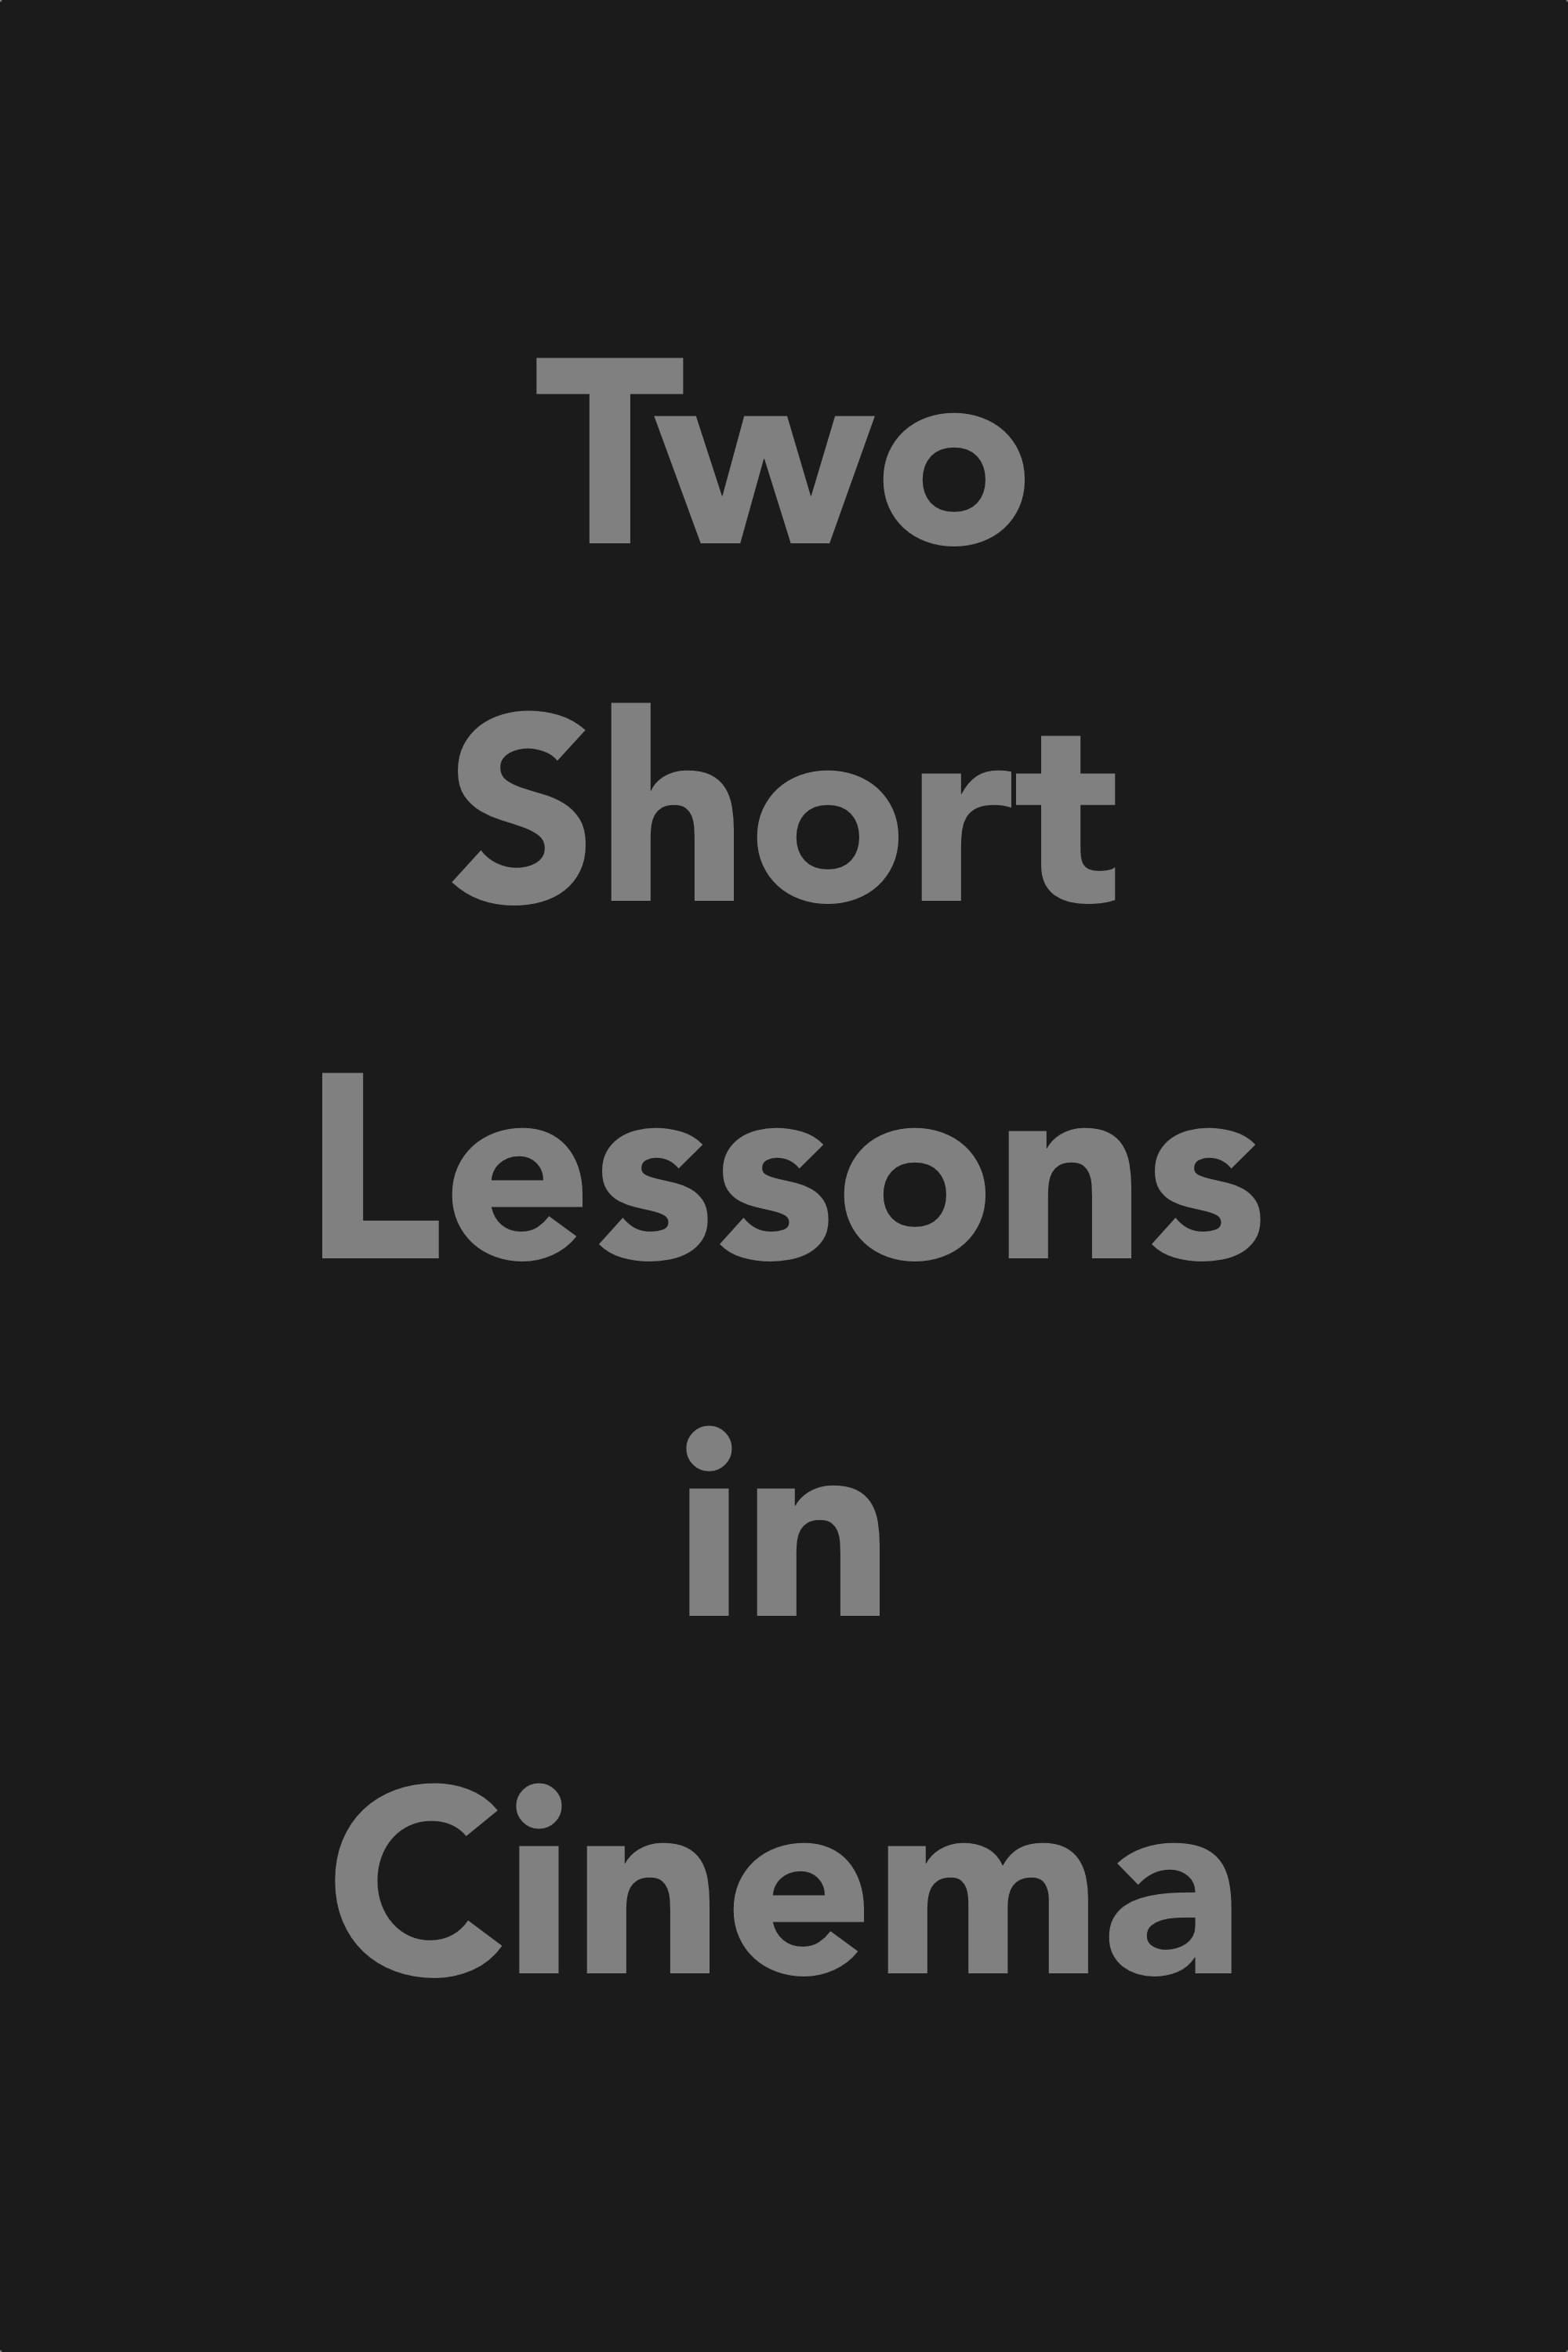 Two Short Lessons in Cinema